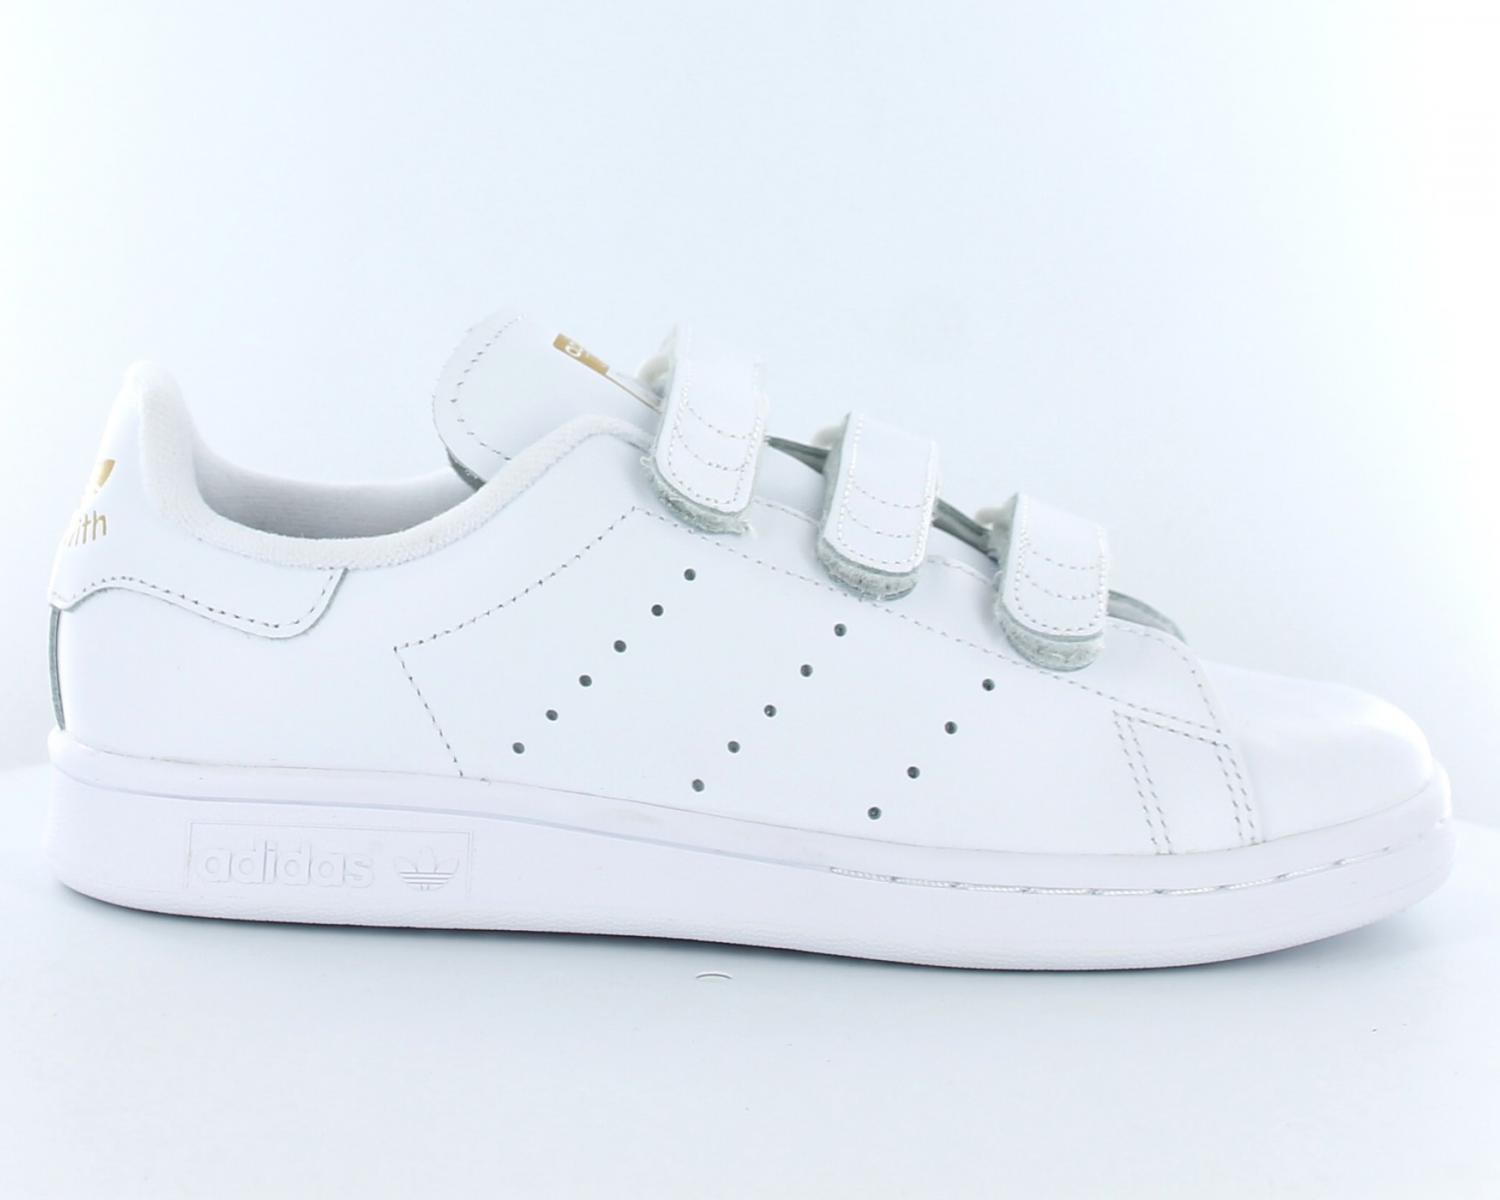 stan smith blanches scratch